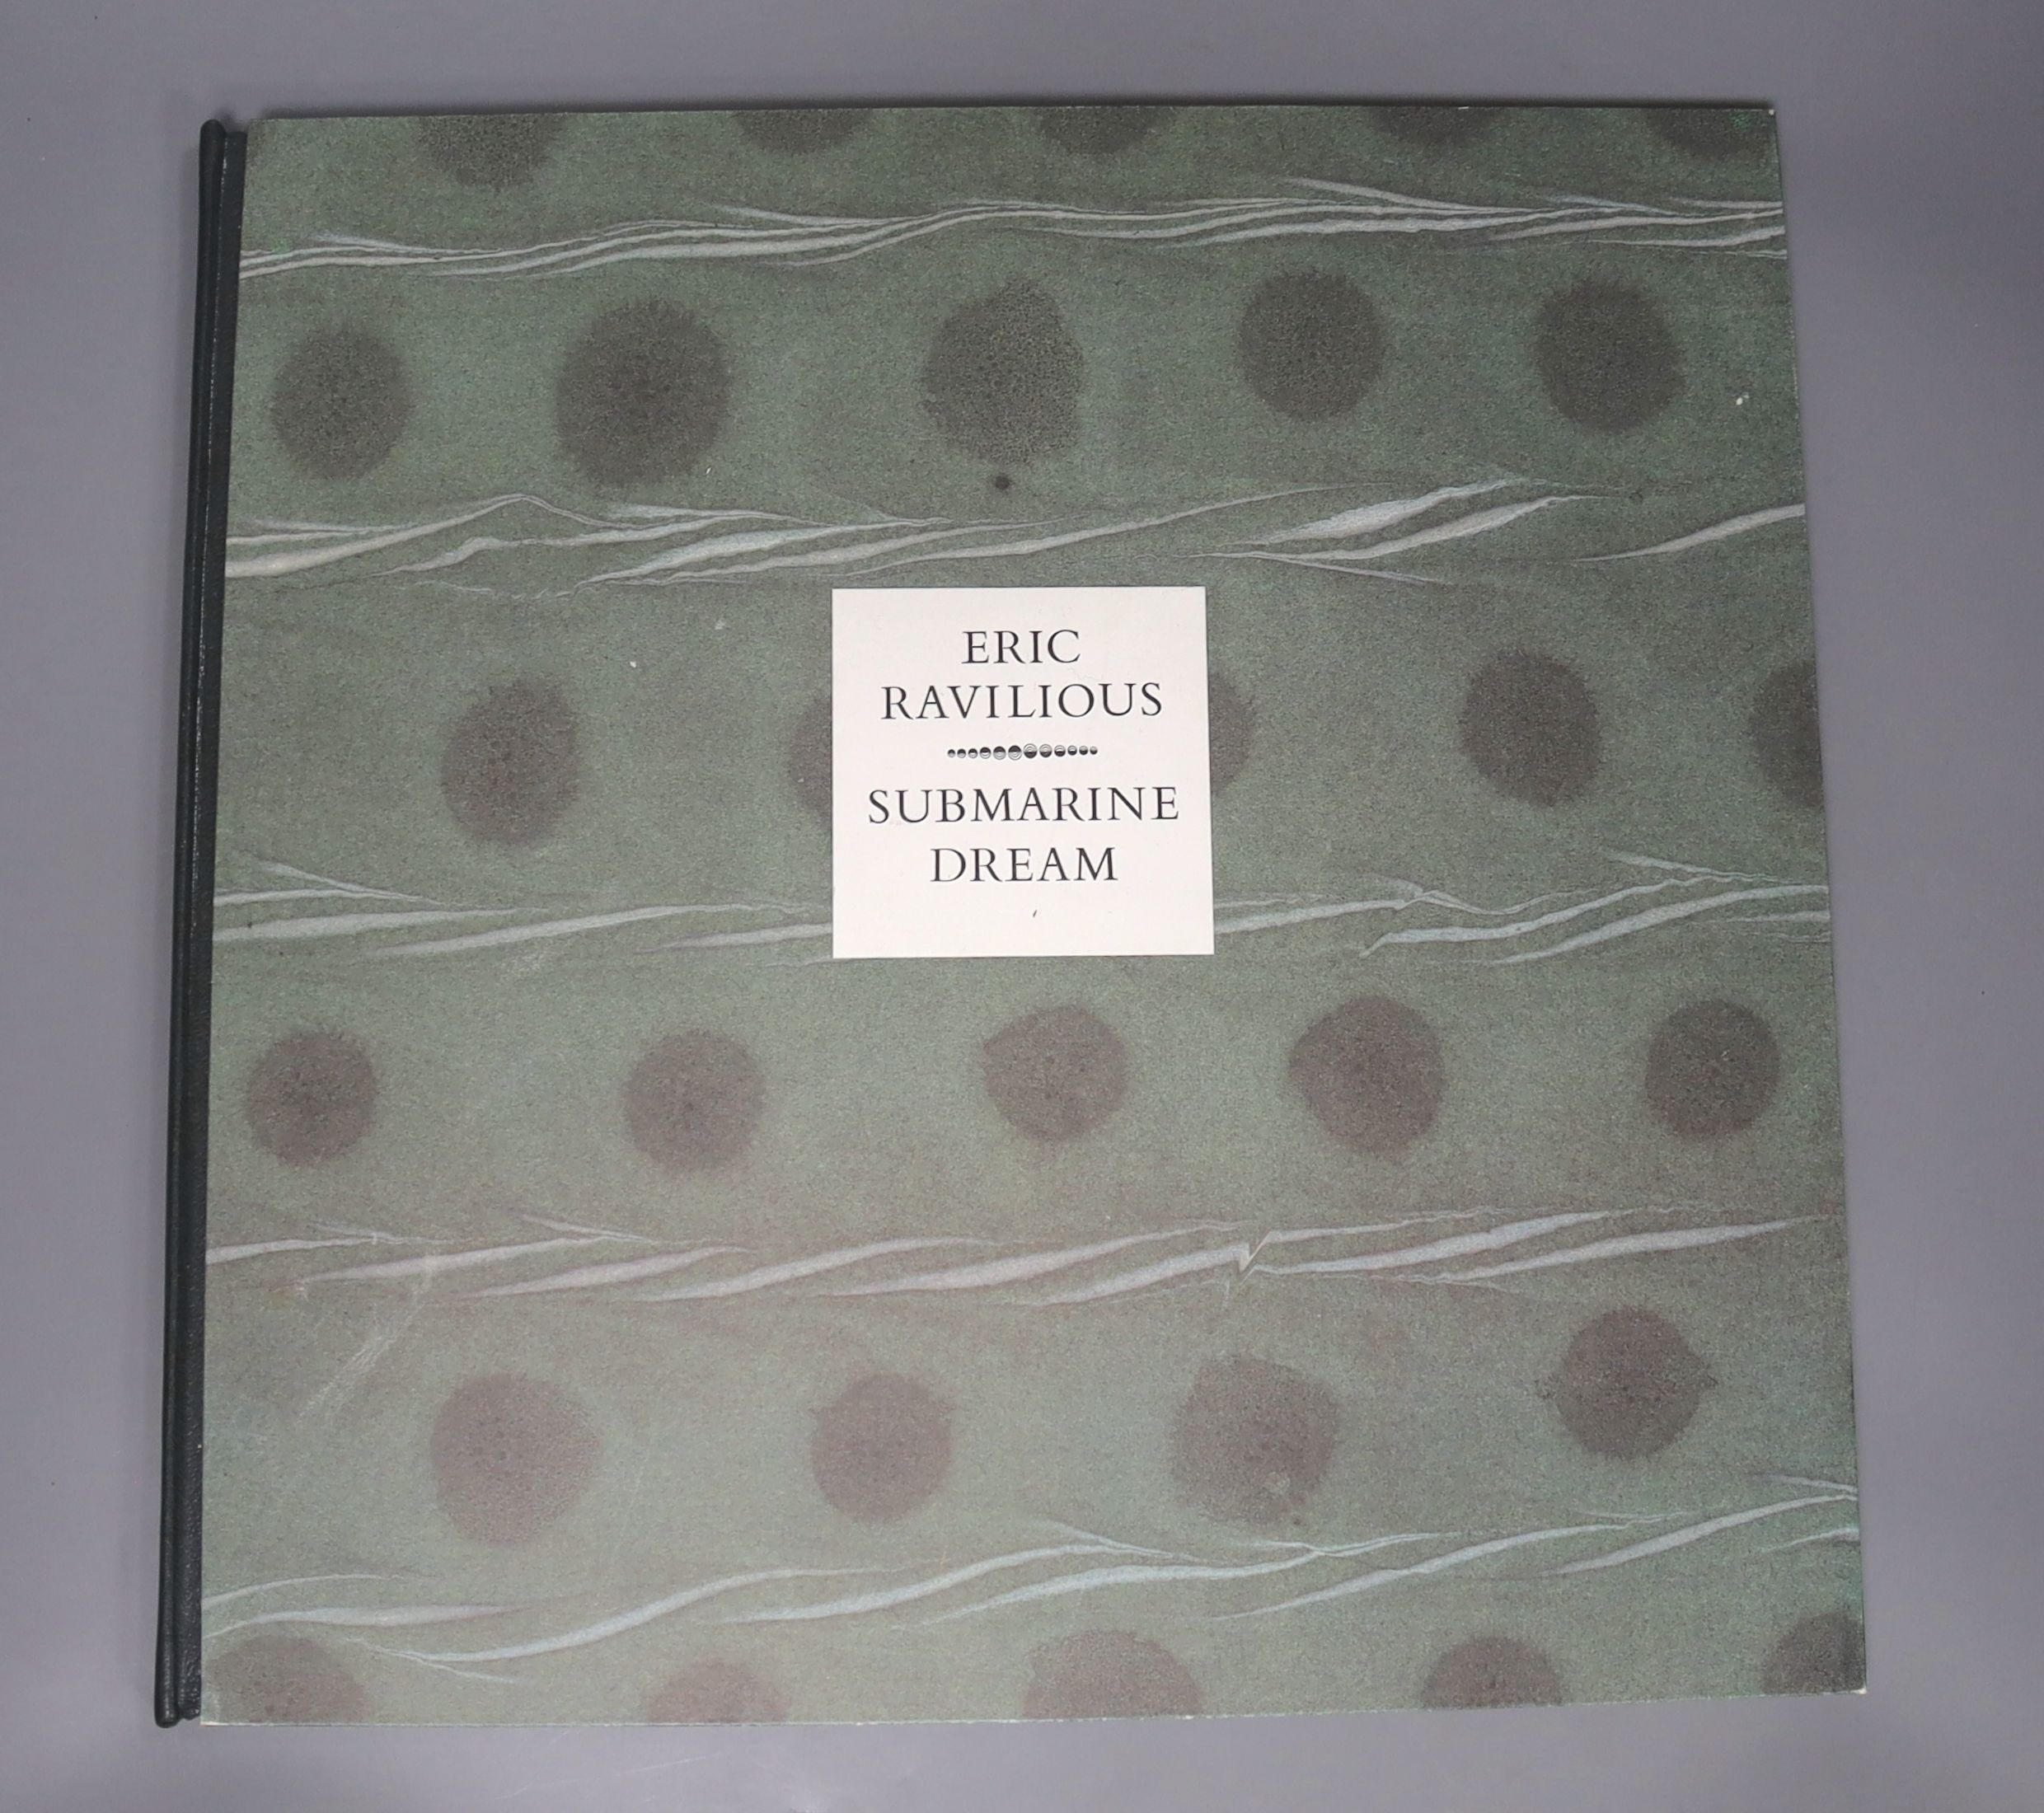 Ravilious, Eric – Submarine Dream: lithographs and letters, edited by Brian Webb with an introduction by Peyton Skipwith, limited edition (300 numbered and signed copies)